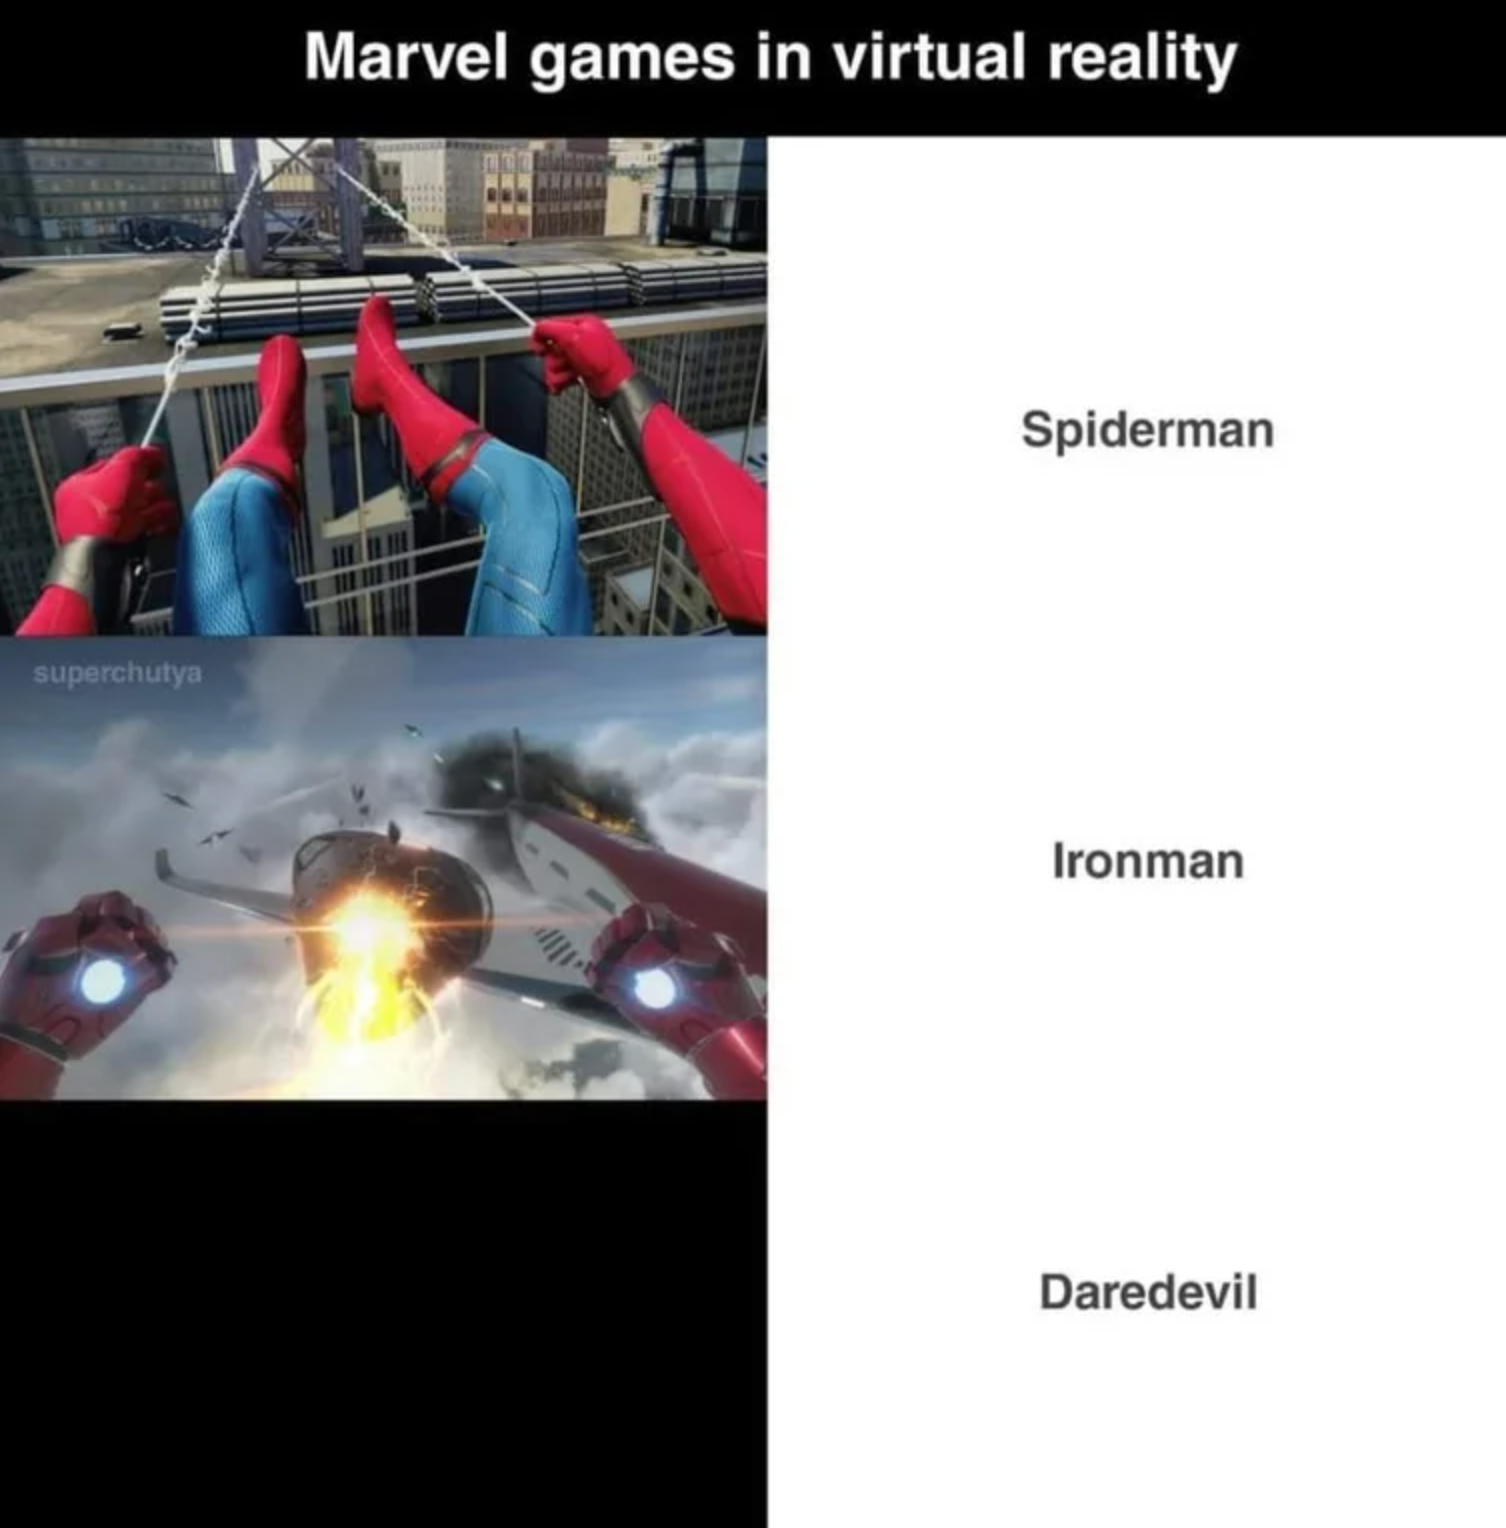 funny gaming memes  - material - Marvel games in virtual reality Spiderman upeschulyo Ironman Daredevil